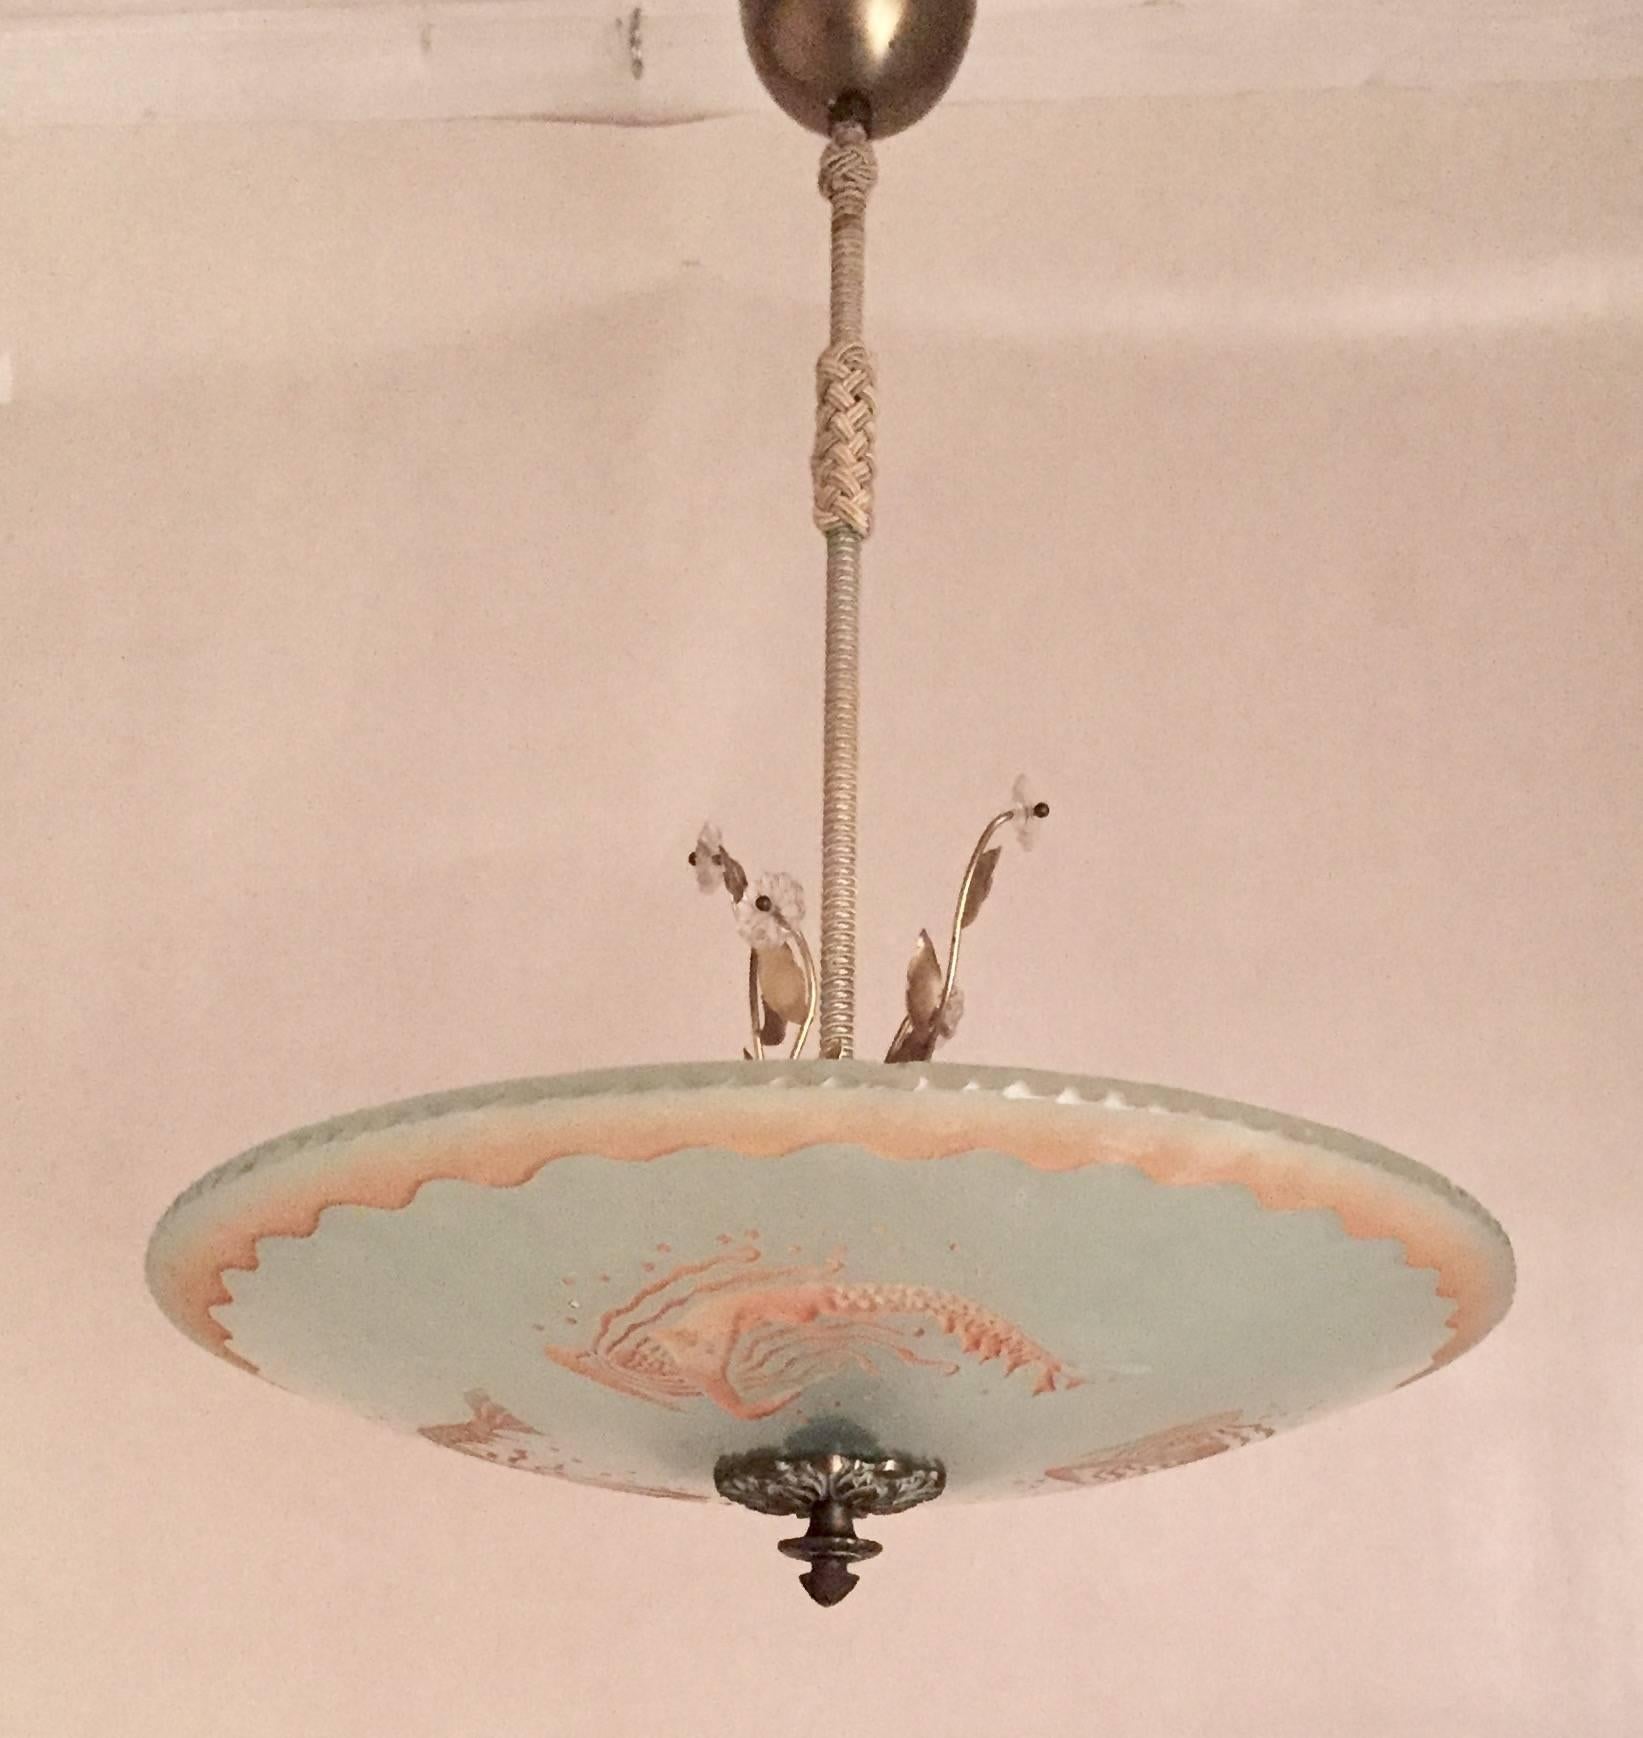 Swedish Art Deco 1935 Orrefors mermaid glass pendant lamp chandelier
A very beautiful Swedish art deco pendant lamp with three mermaids swimming in a circle painted and etched into the raw glass shade. A beautiful piece of Swedish high quality art